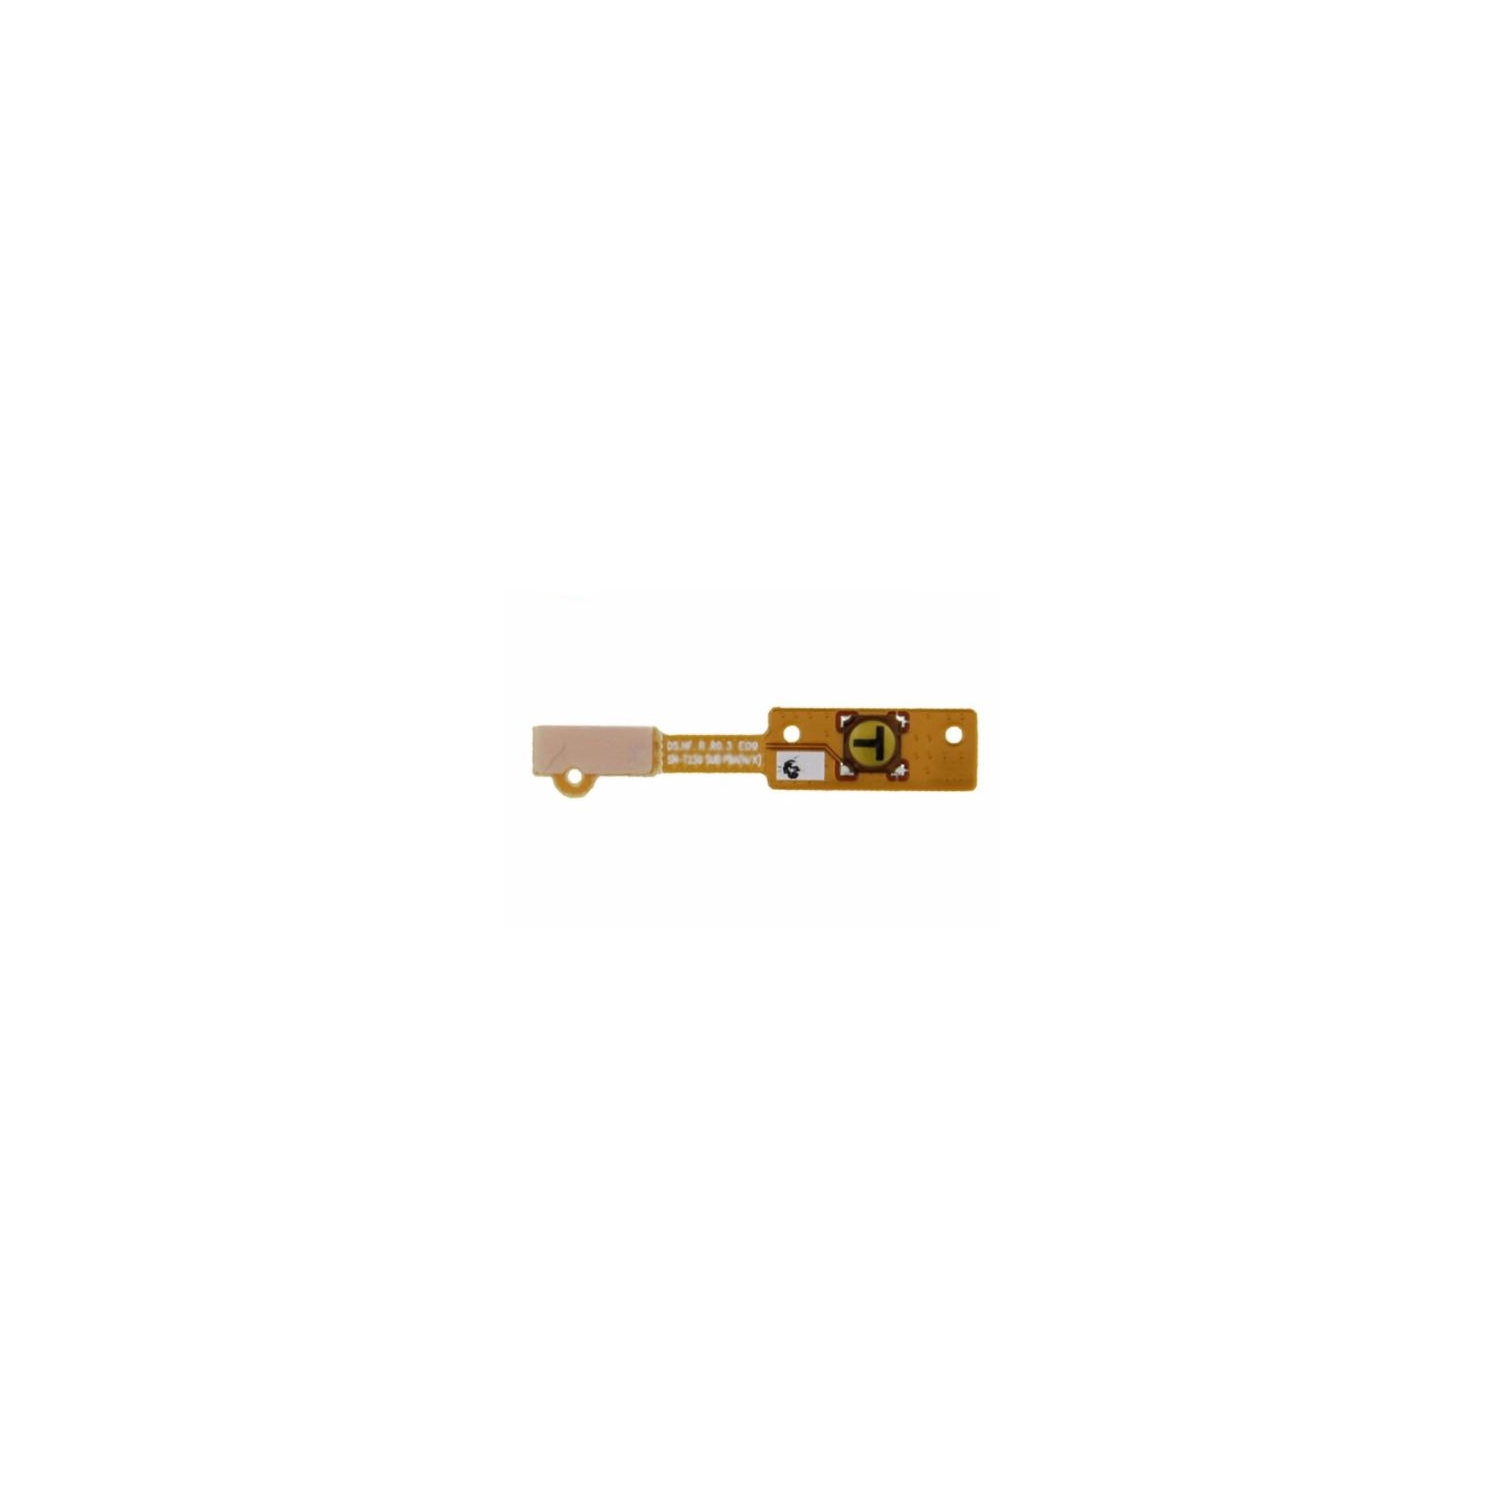 Samsung Galaxy Tab 4 7.0 SM-T230 Tablet Home Button Flex Cable Replacement